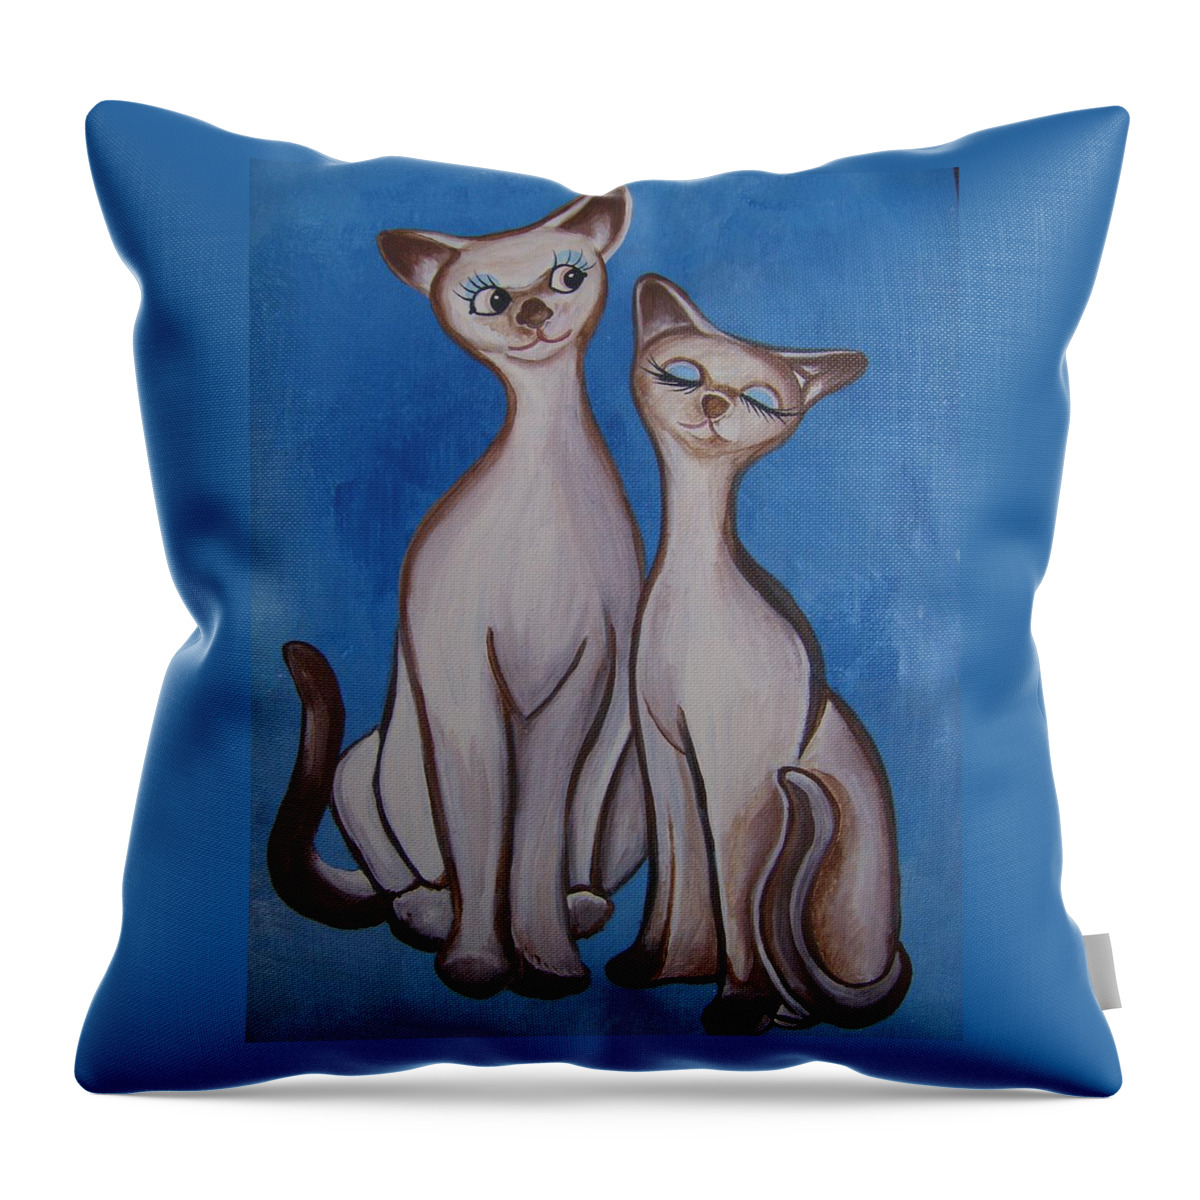 Siamese Cats Throw Pillow featuring the painting We Are Siamese by Leslie Manley